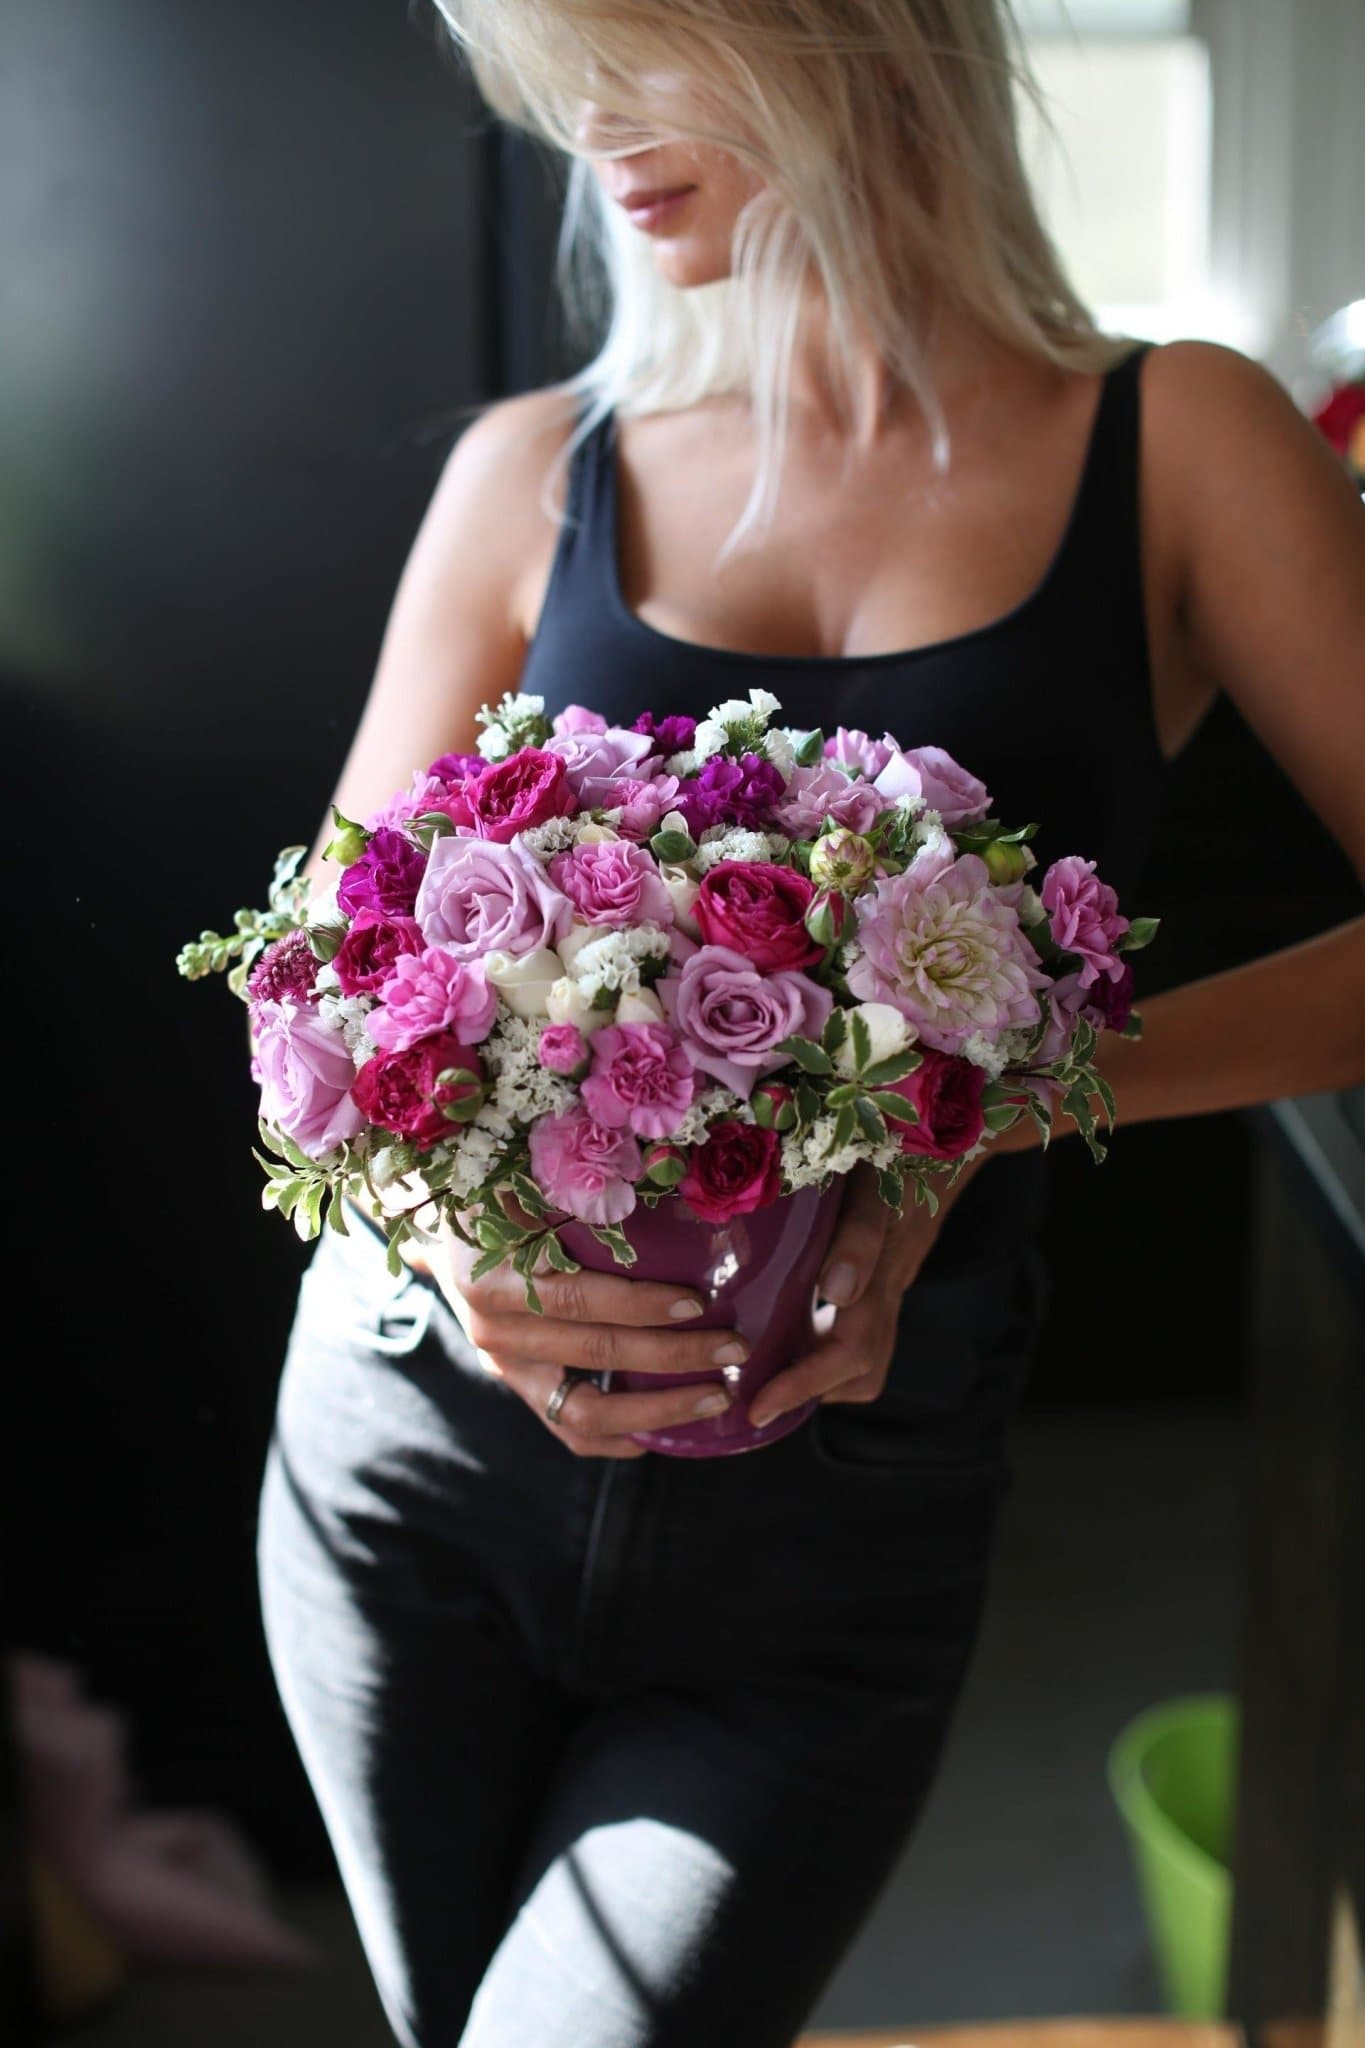 Anastasia(Purple and pink roses with carnations) - Los Angeles Florist - Pink Clover